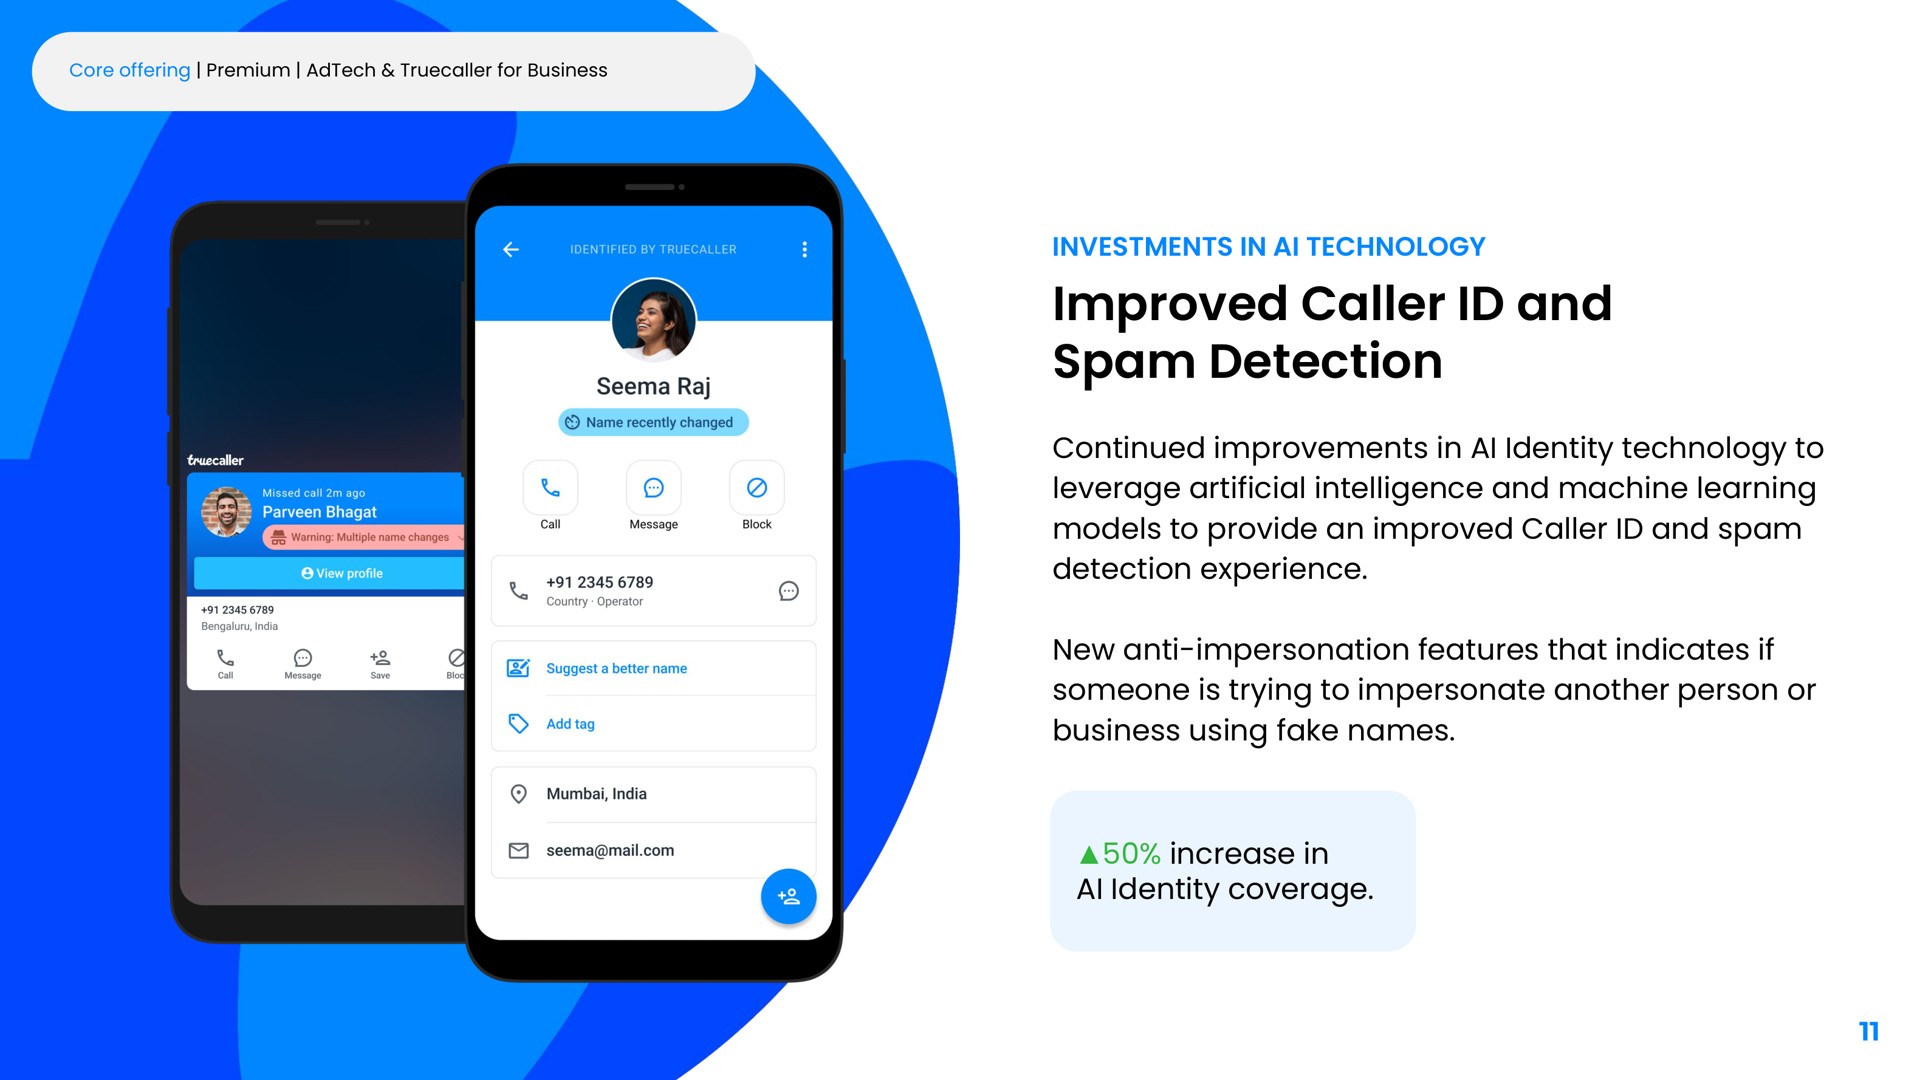 improved caller and detection | Truecaller